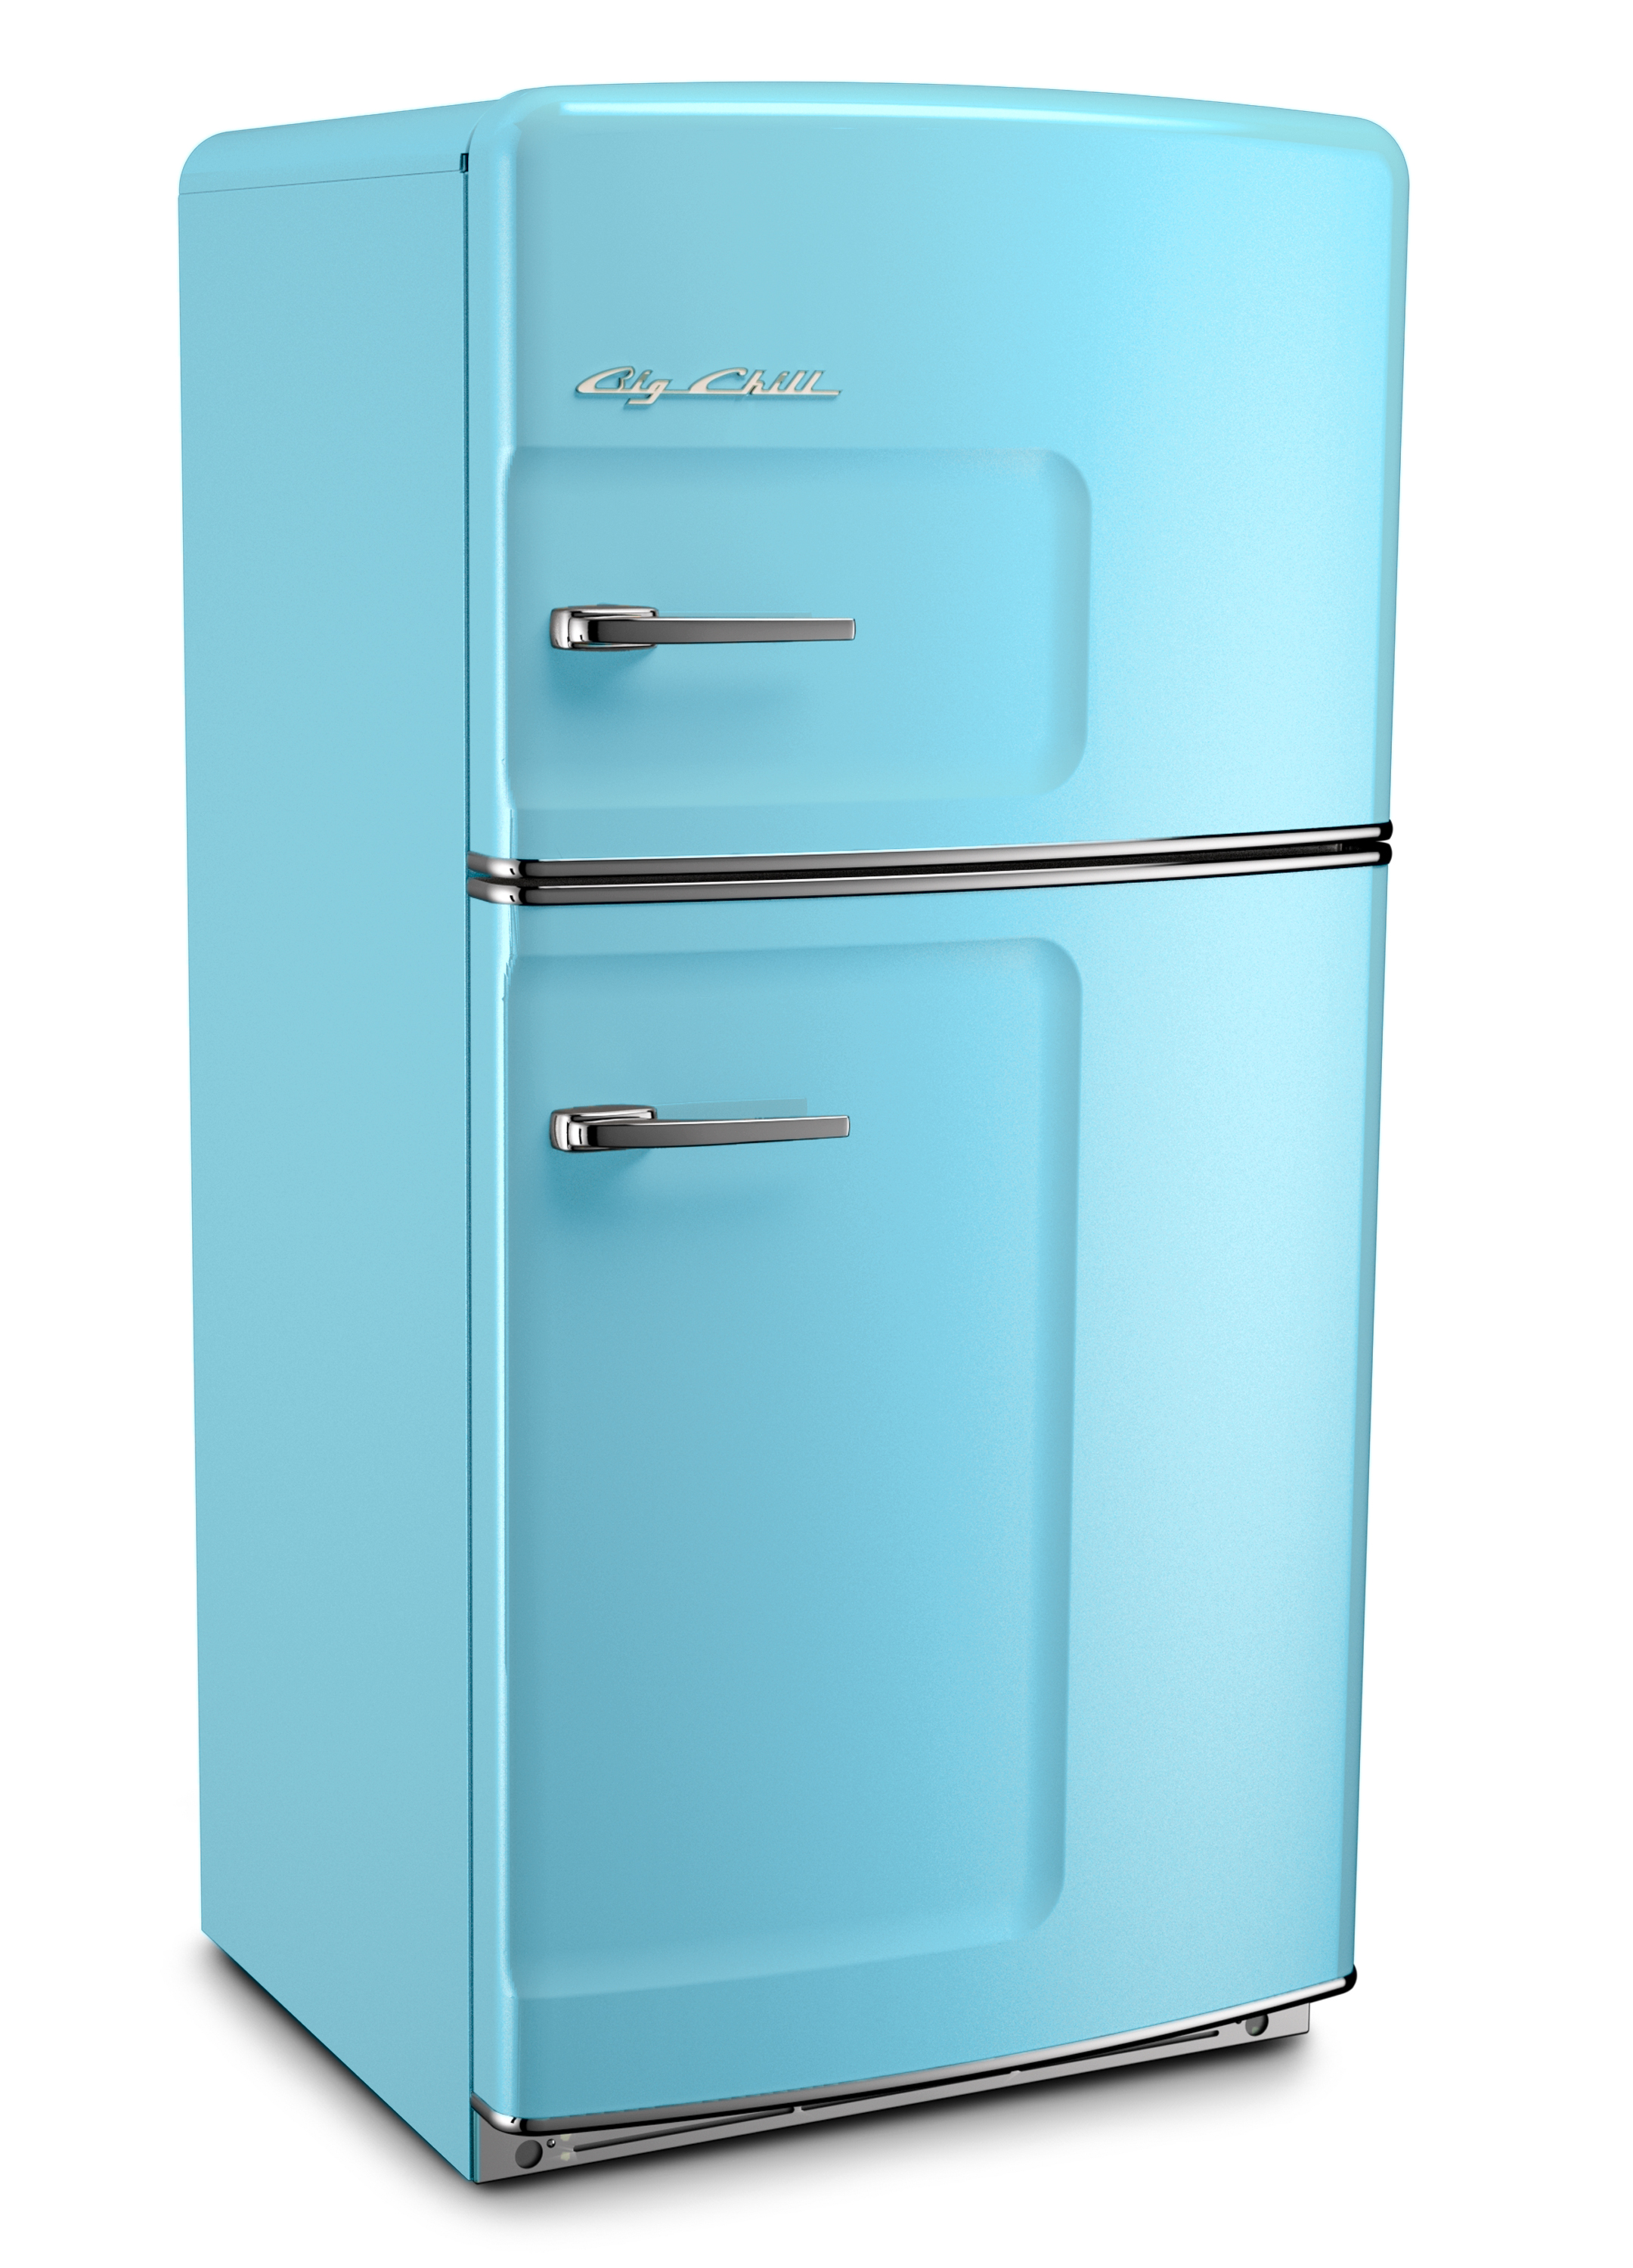 Introducing the Big Chill Lifestyle: Staying Cool Isn't Just for Freezers